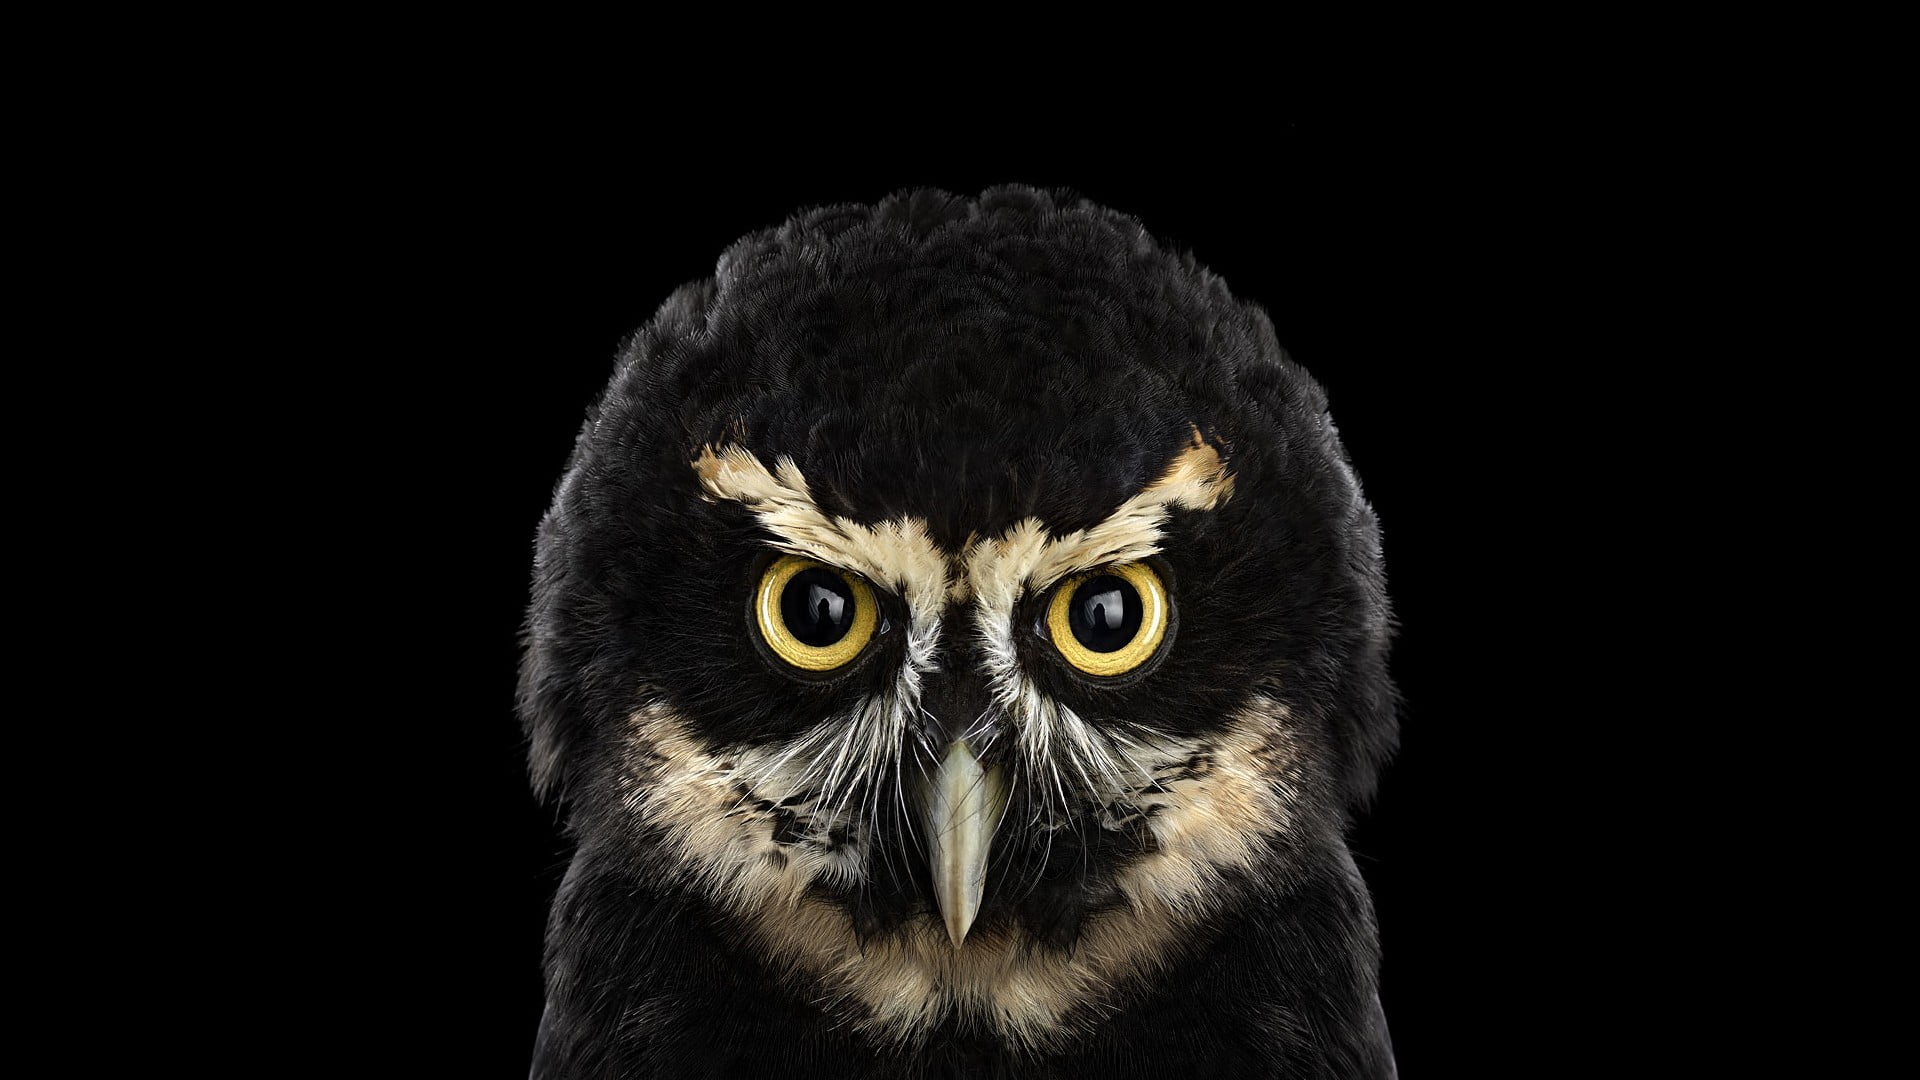 black and beige owl poster, photography, animals, birds, owl